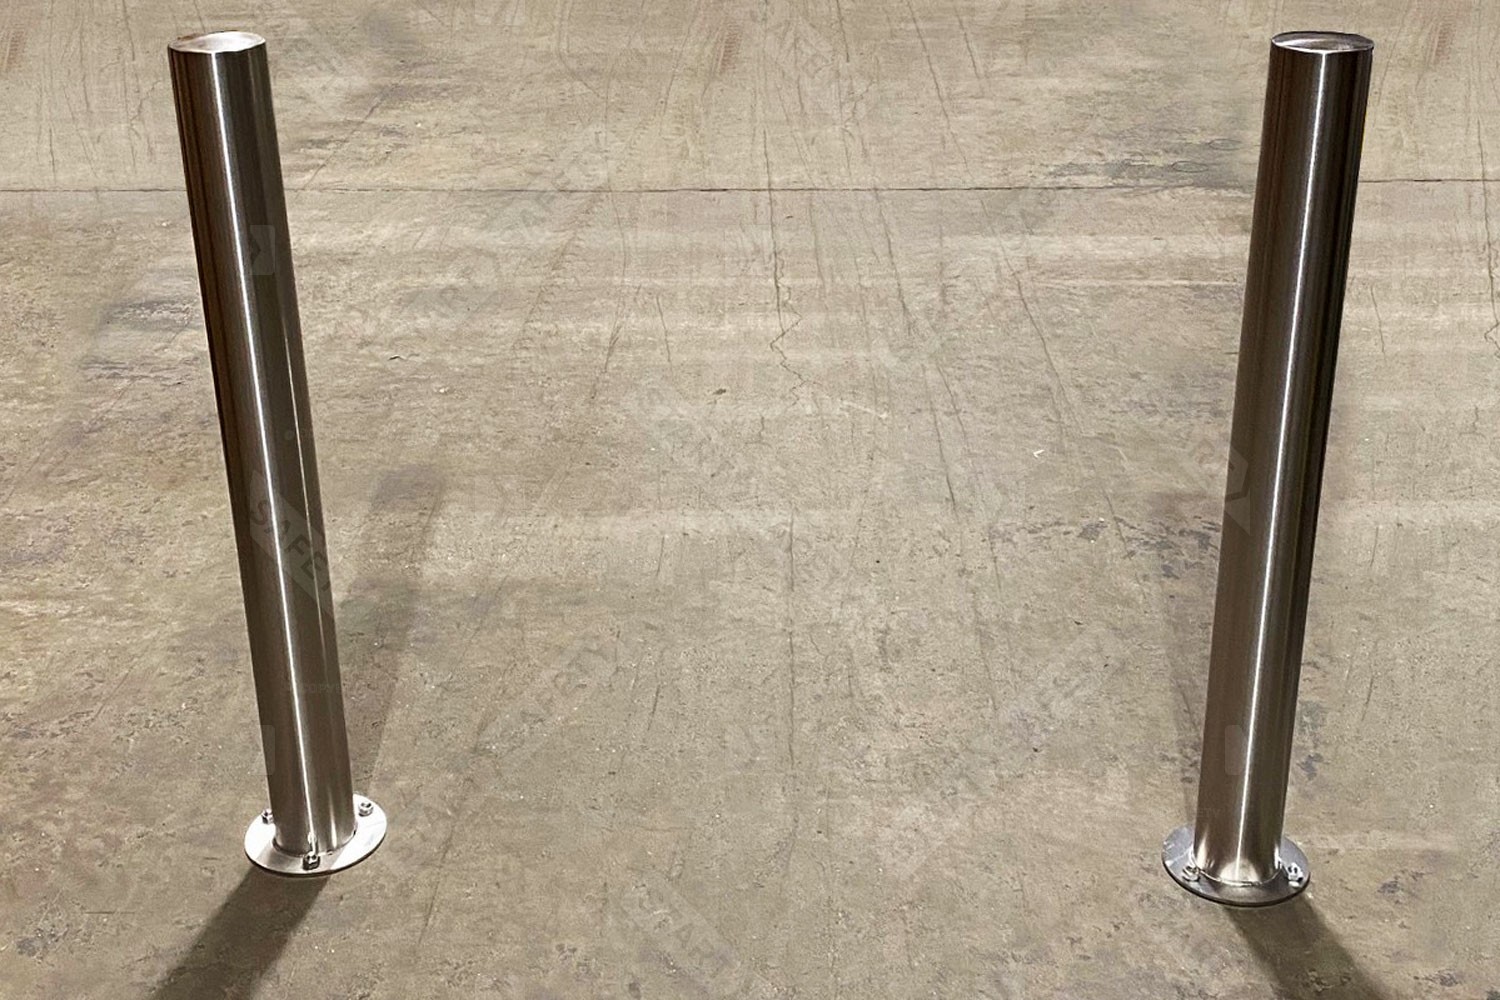 stainless steel bollards installed into concrete